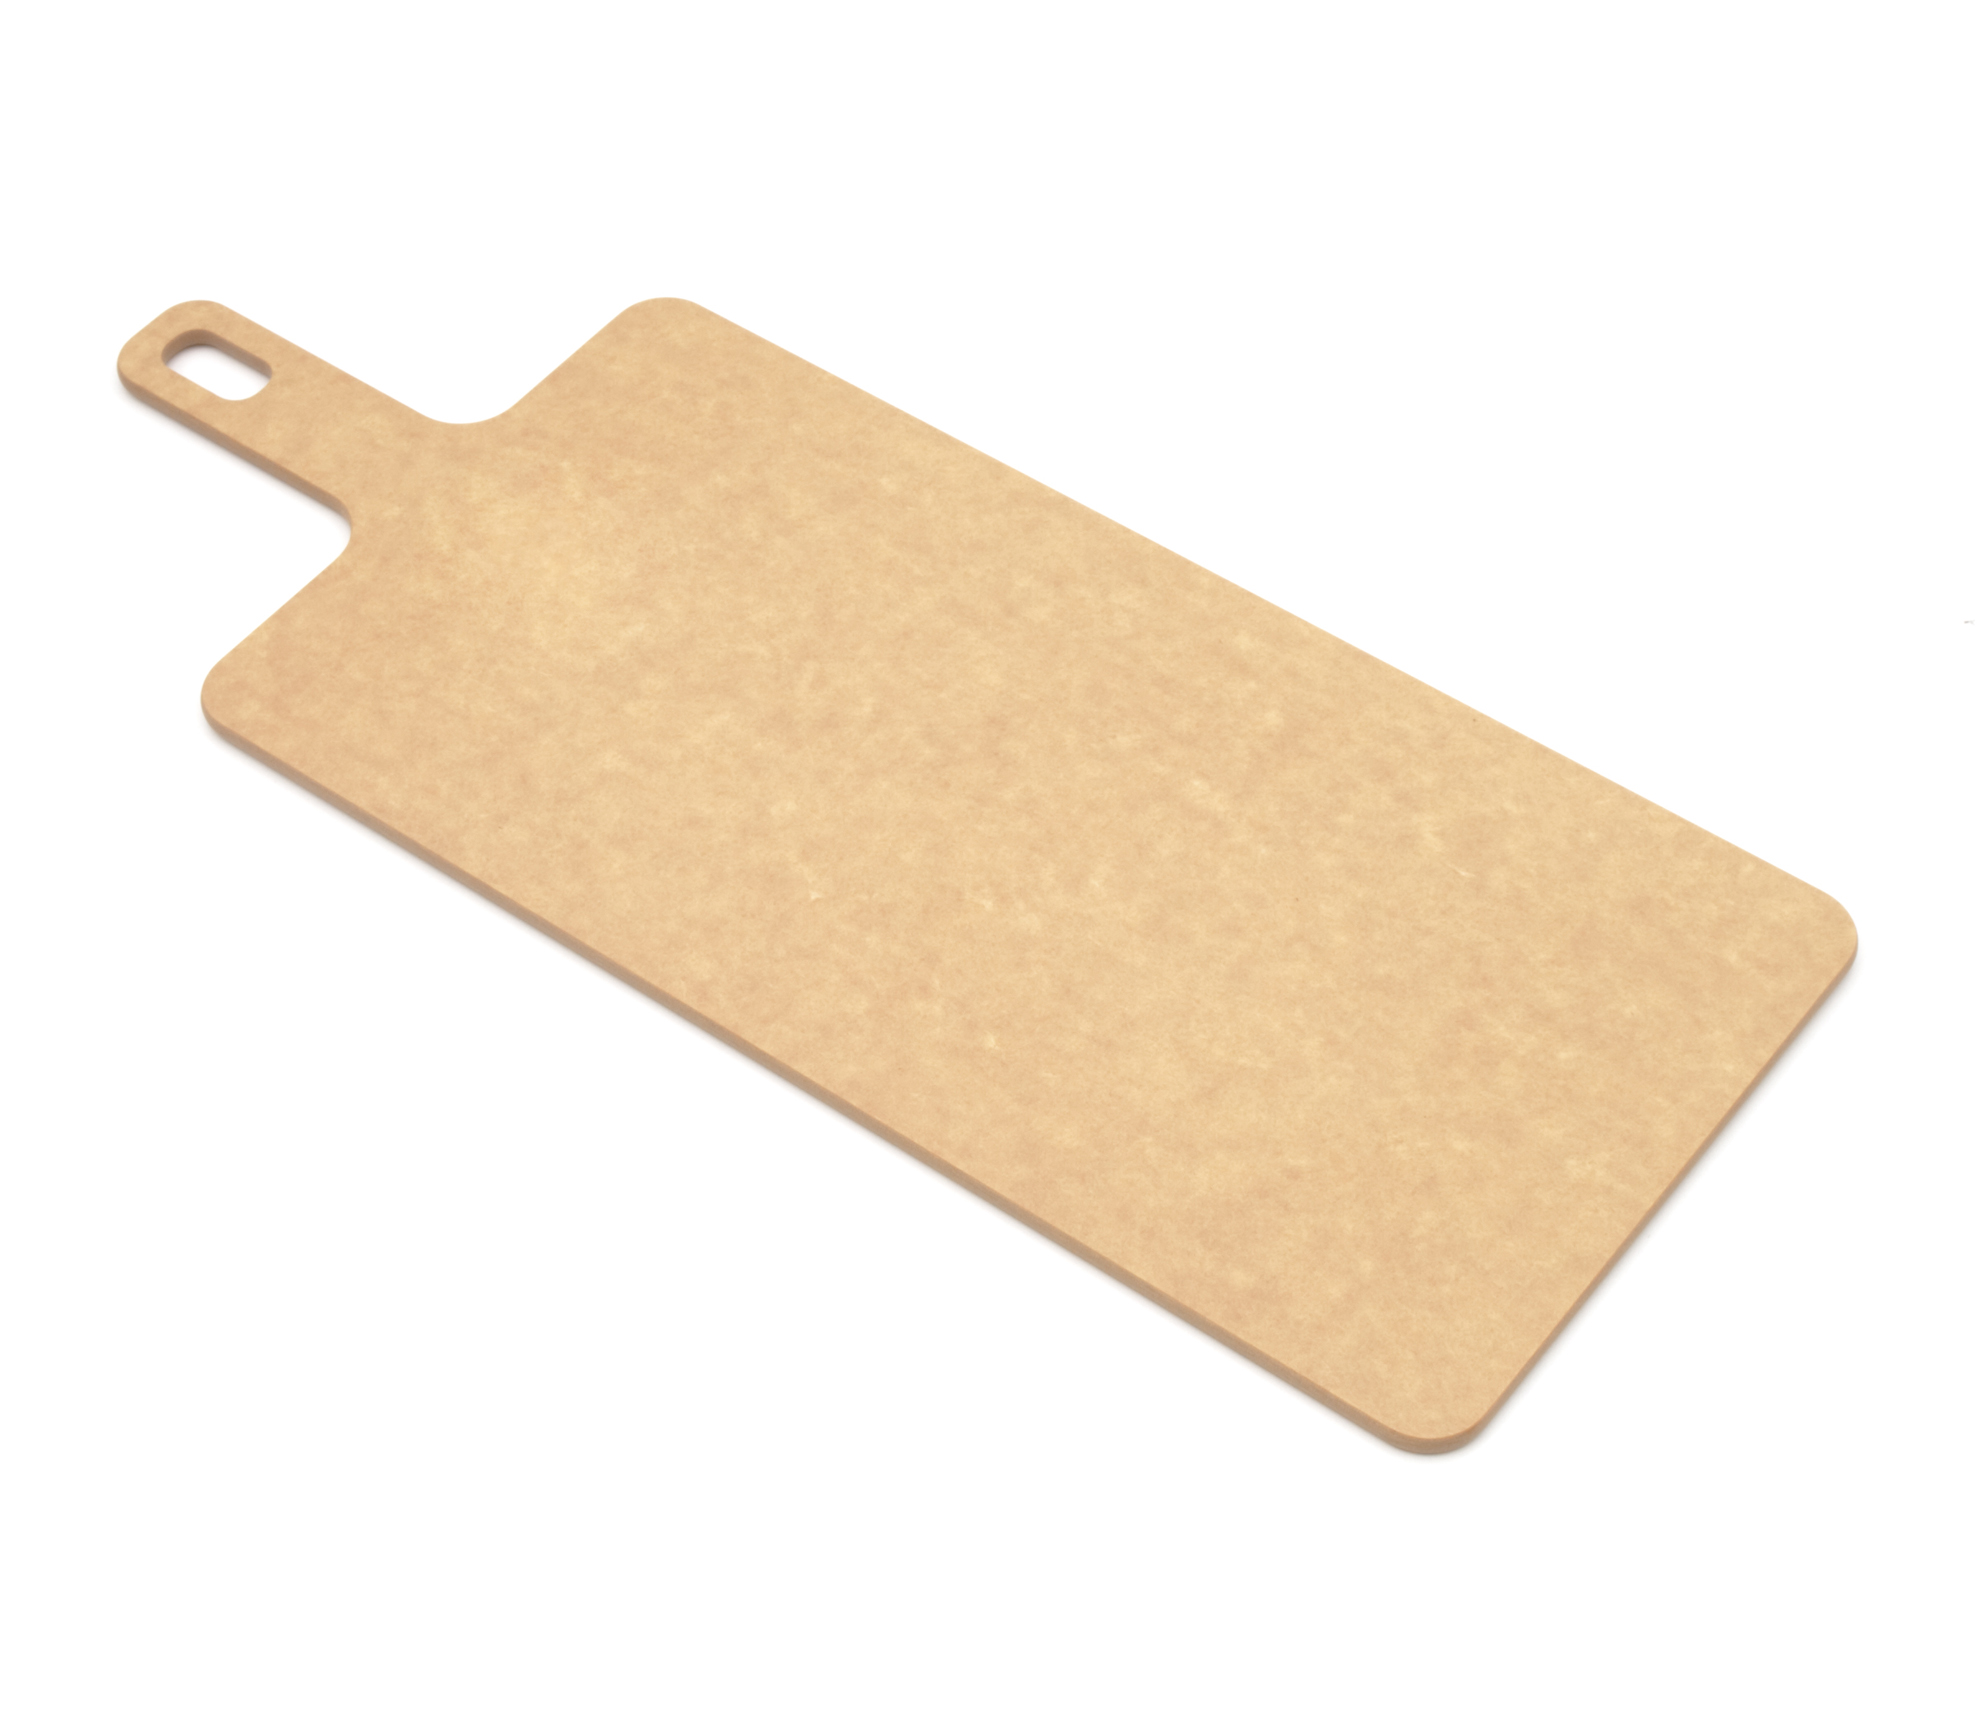 serving paddle board-commercial-natural-19×7-429197501